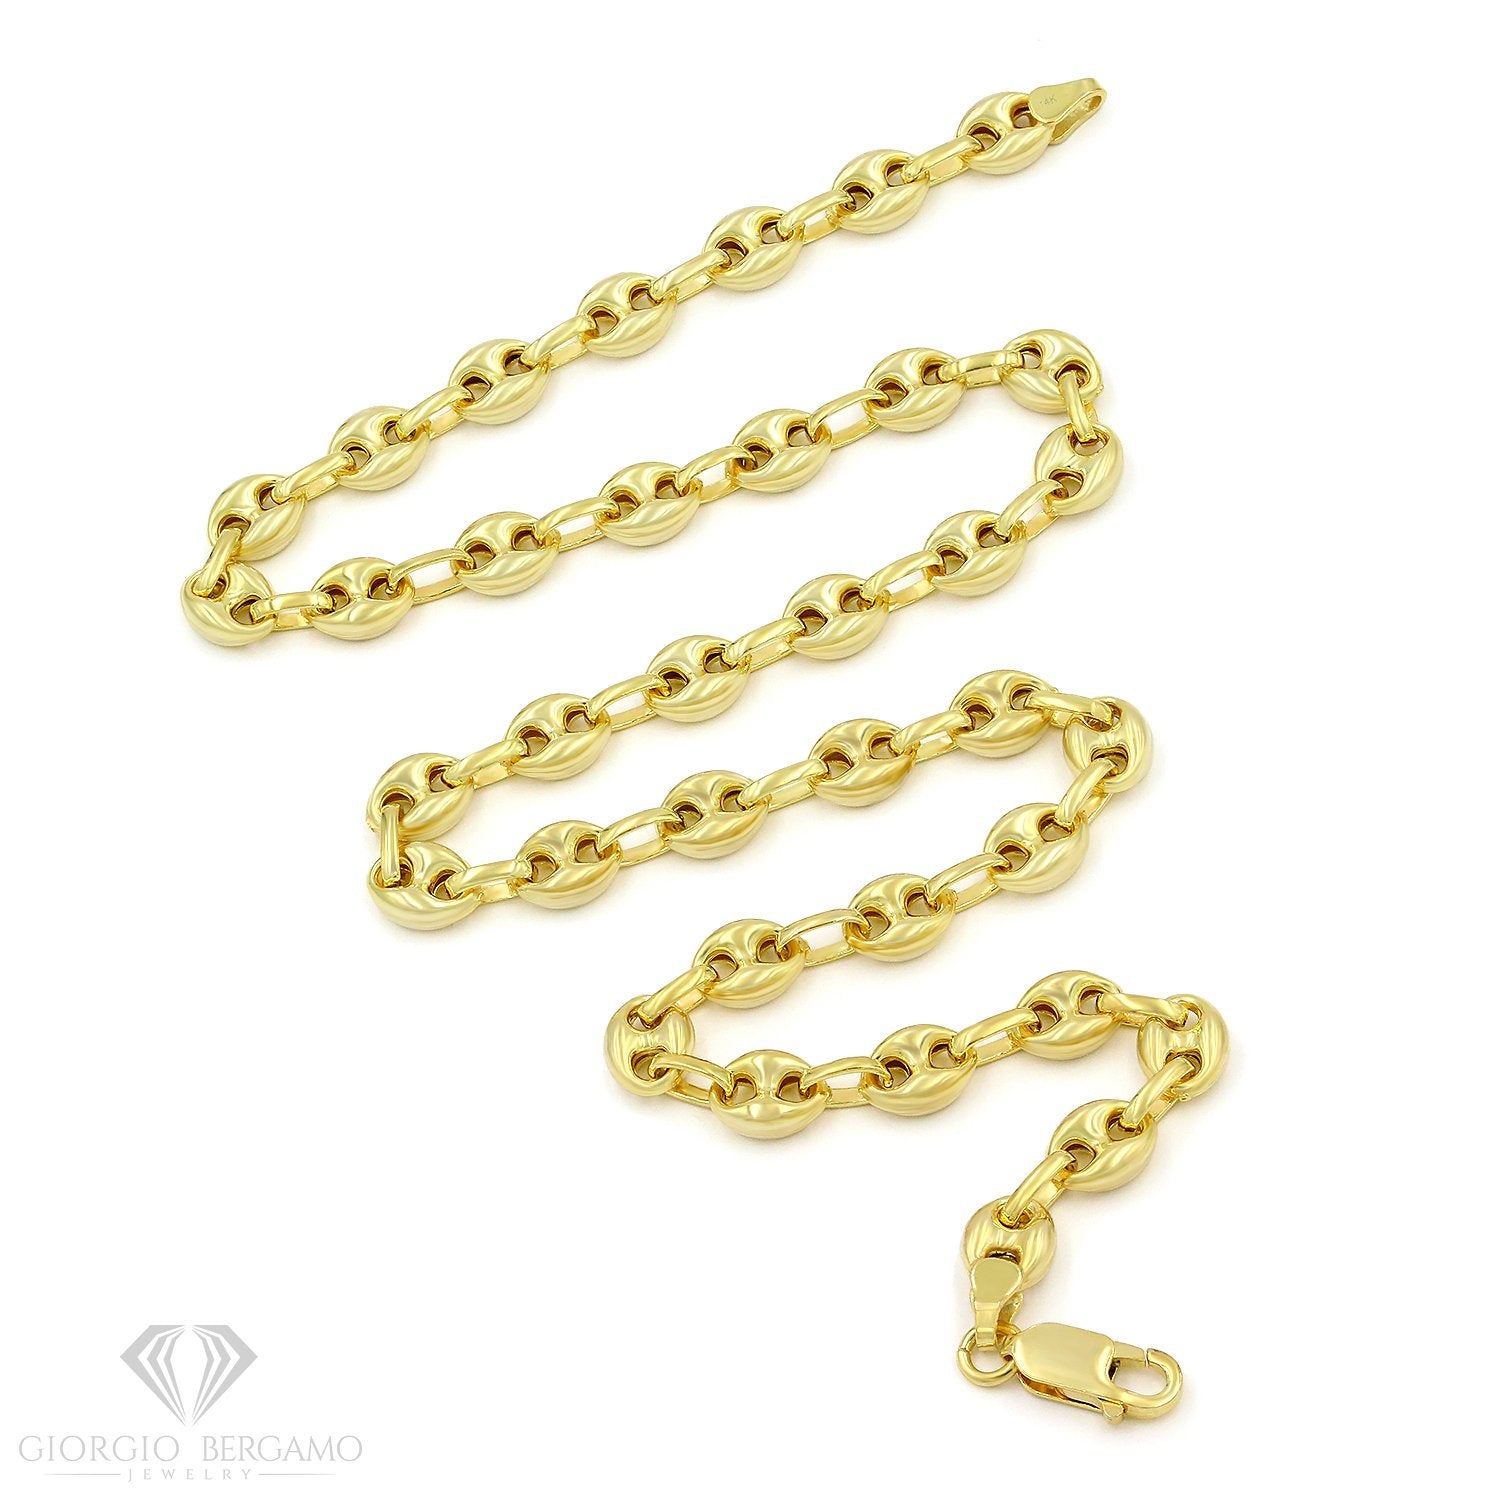 14K Yellow Gold 7mm Hollow Puffed Mariner Chain